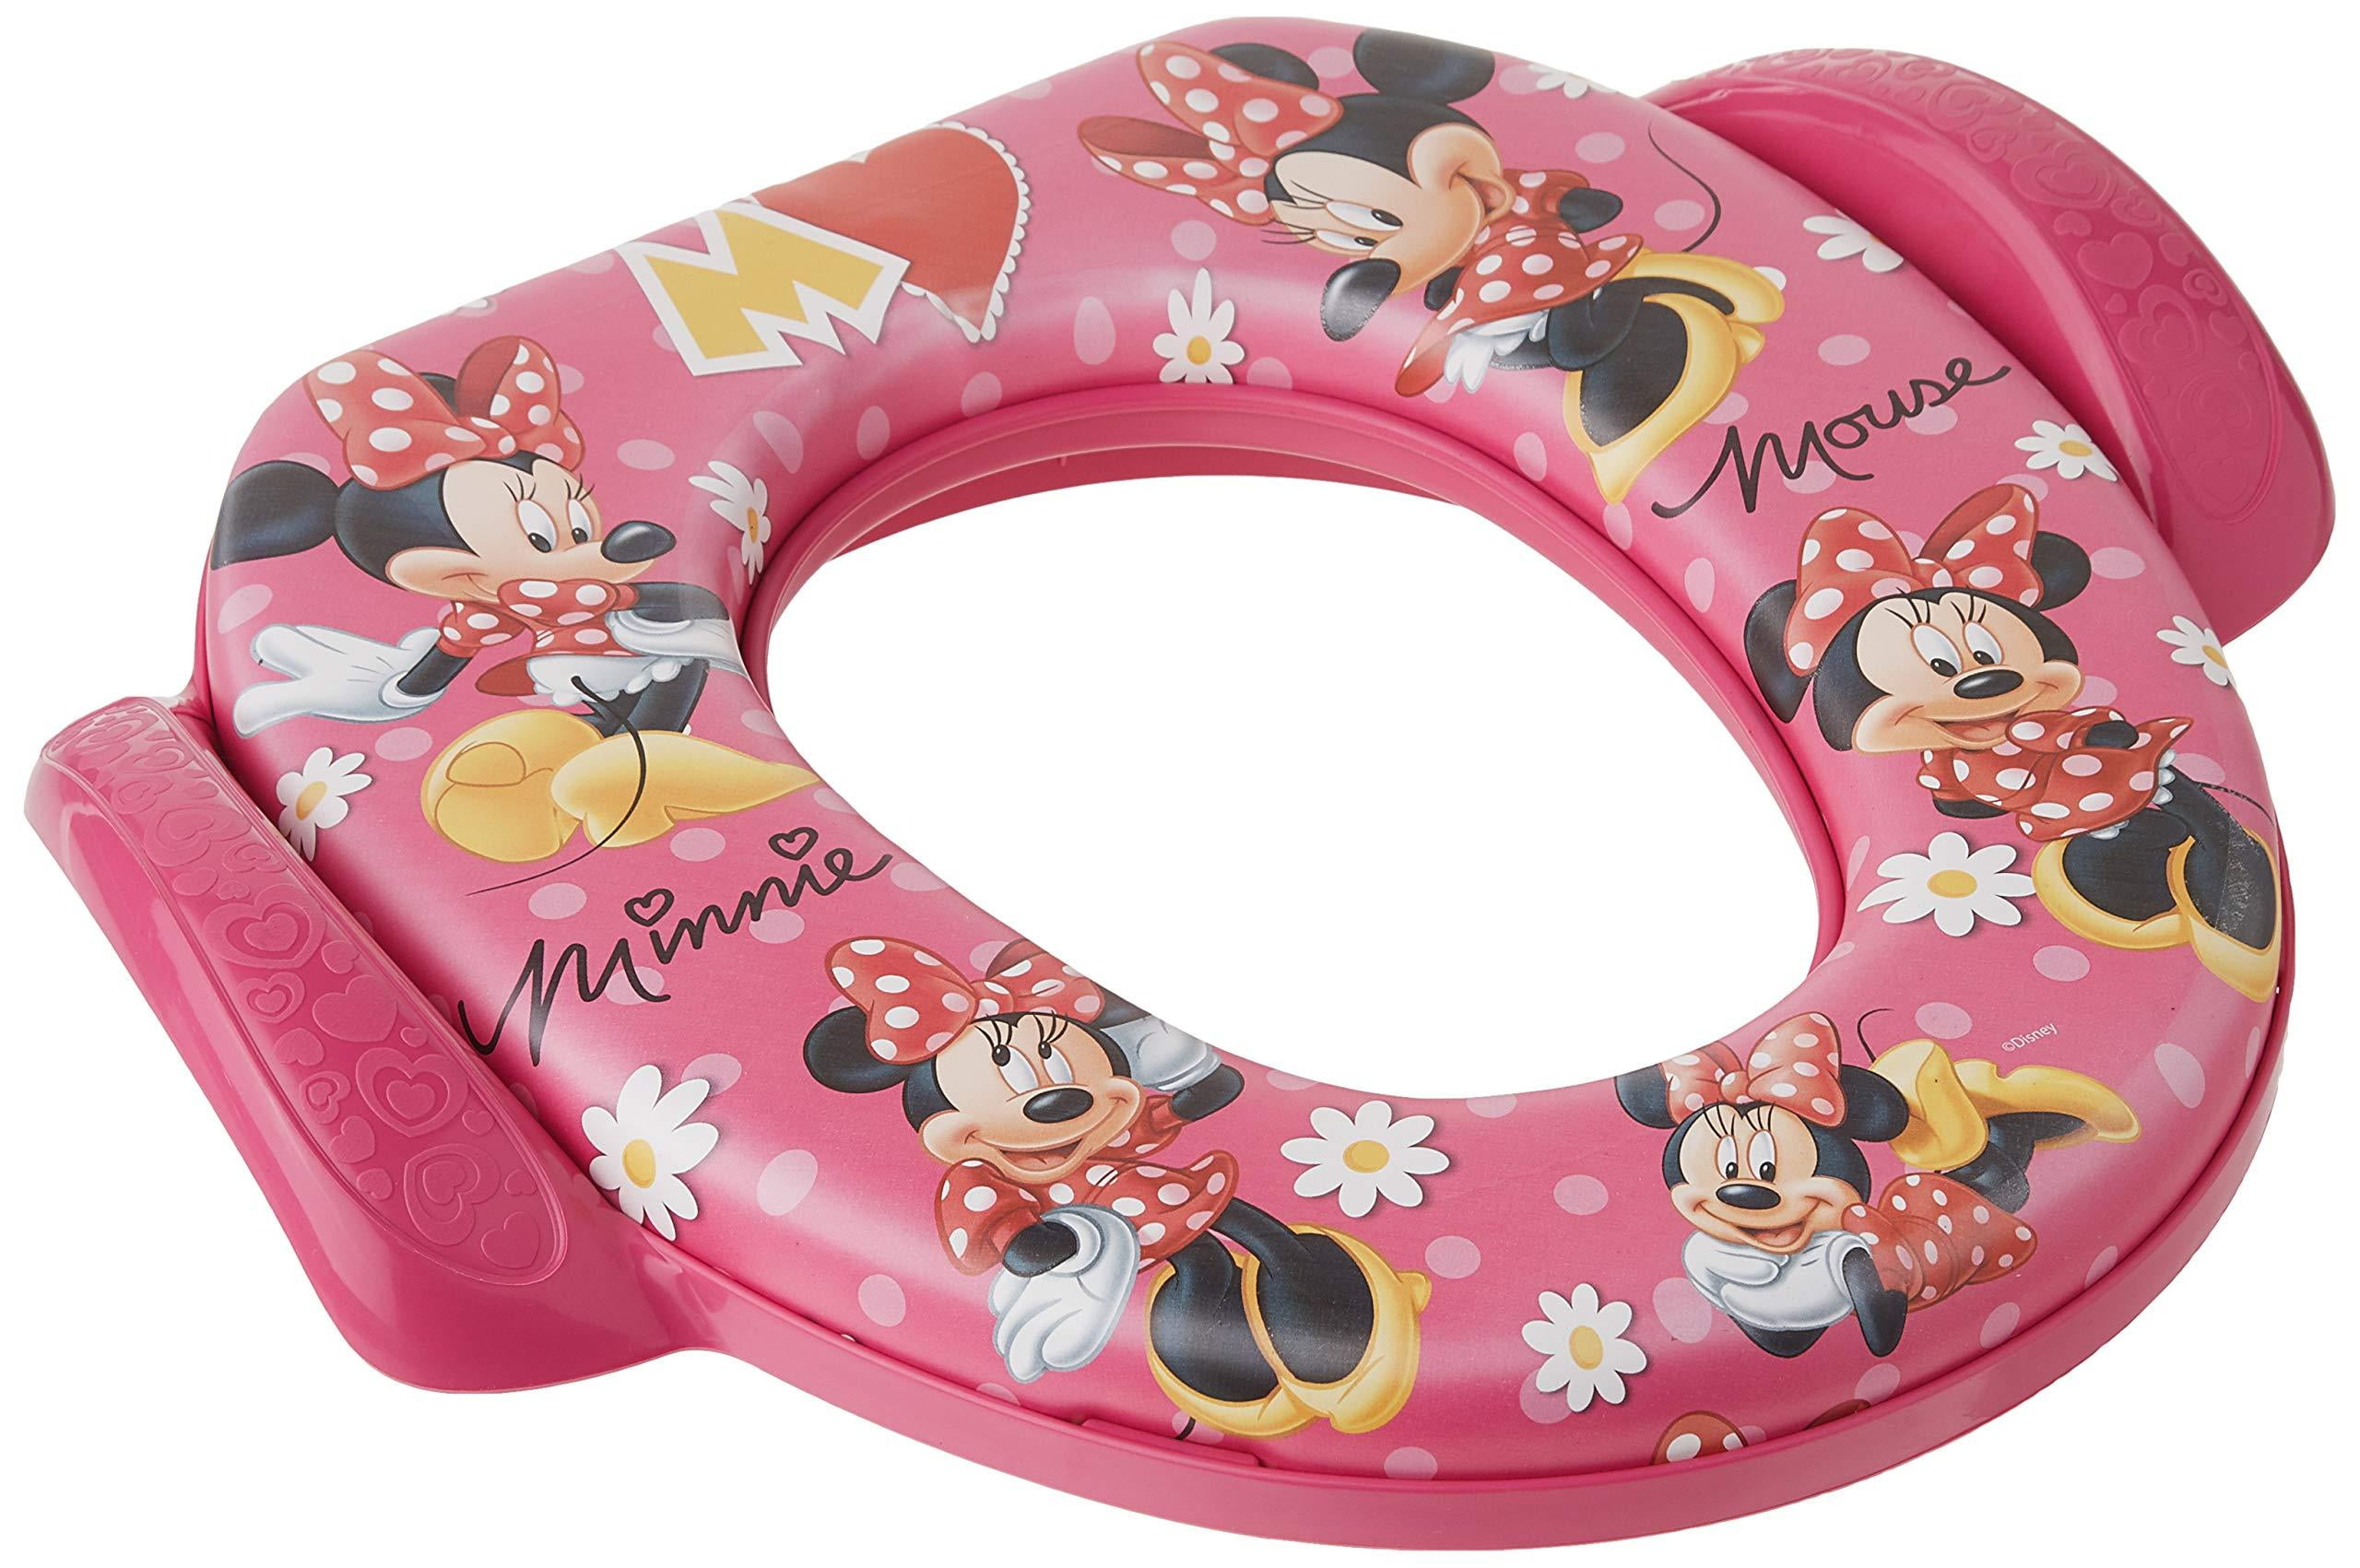 Minnie Mouse "Soft Floral" Potty Seat 